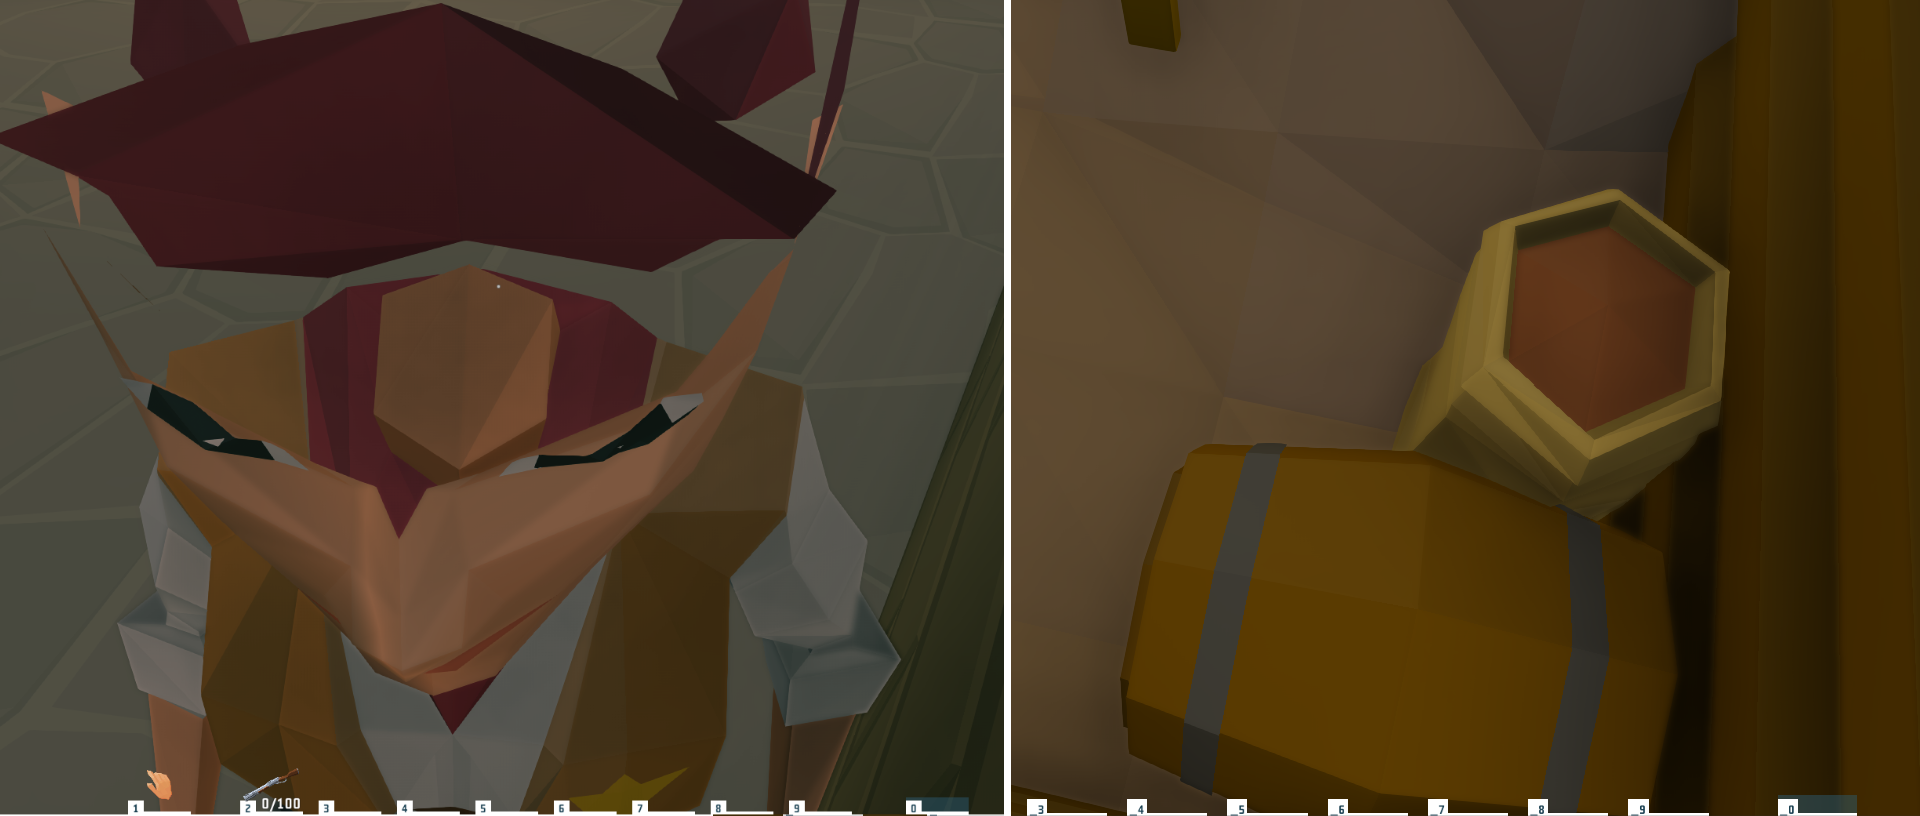 Mar 27 2019 Weekly Sneaky Wip 10 Ylands Mailuki Sharks Now Have New Victims To Chase Share Mar 22 2019 Dev Diary 70 Ylands Mailuki Hey There Fellow Ylanders We Re Almost There With The Update Actually We Ve Managed To Sneak In Some - roblox game camera glitching fix